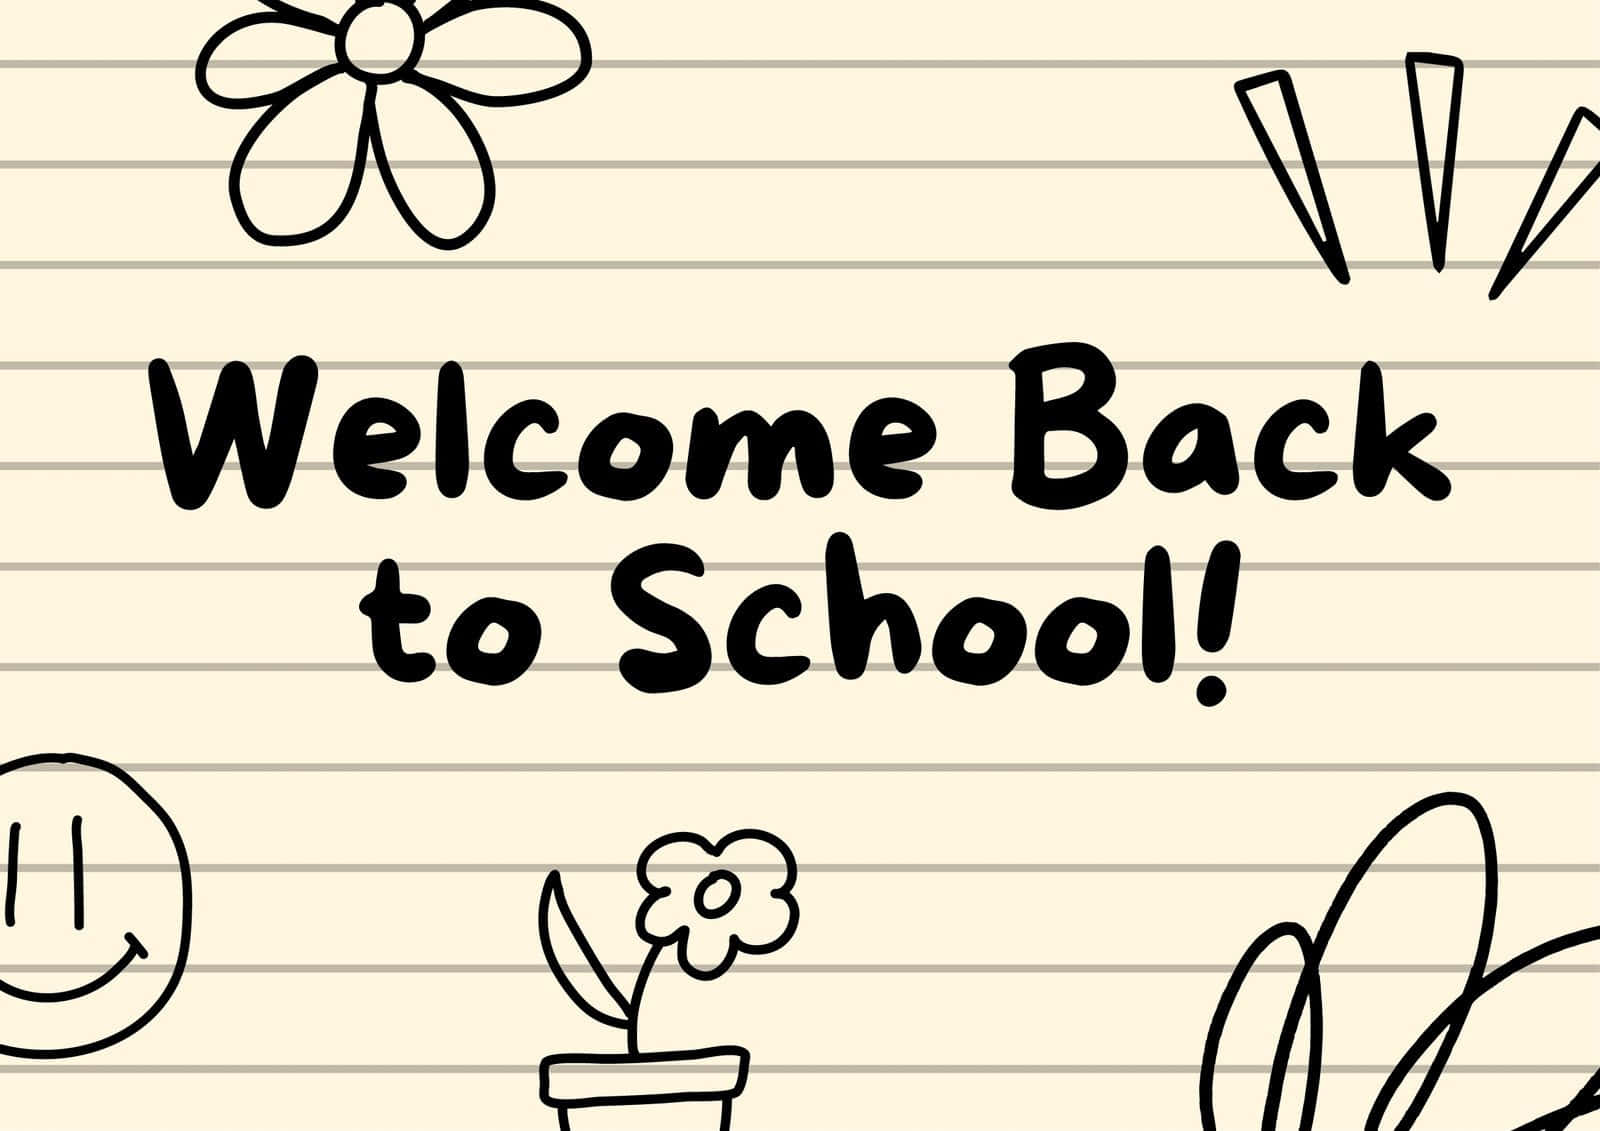 Welcome Backto School Greeting Wallpaper